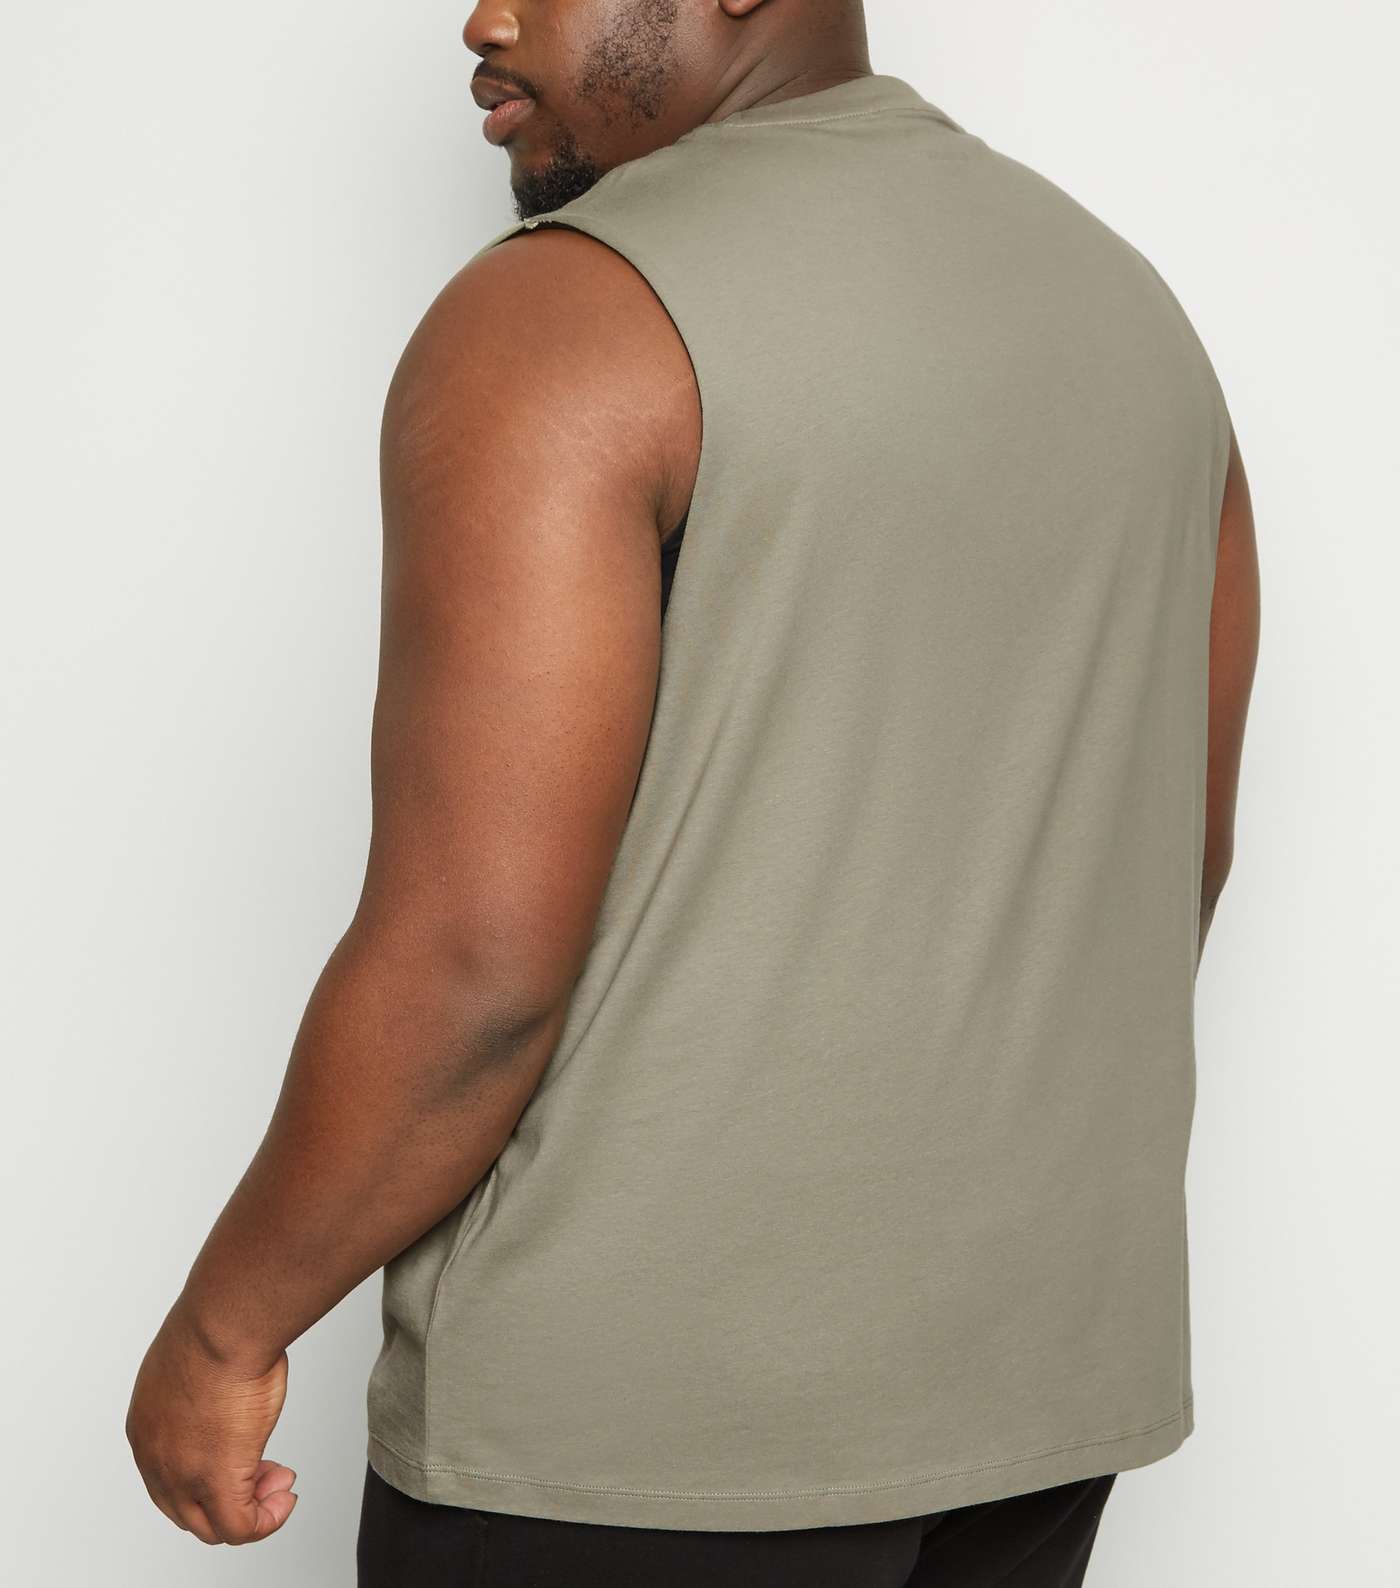 Plus Size Olive Tank Top Image 3